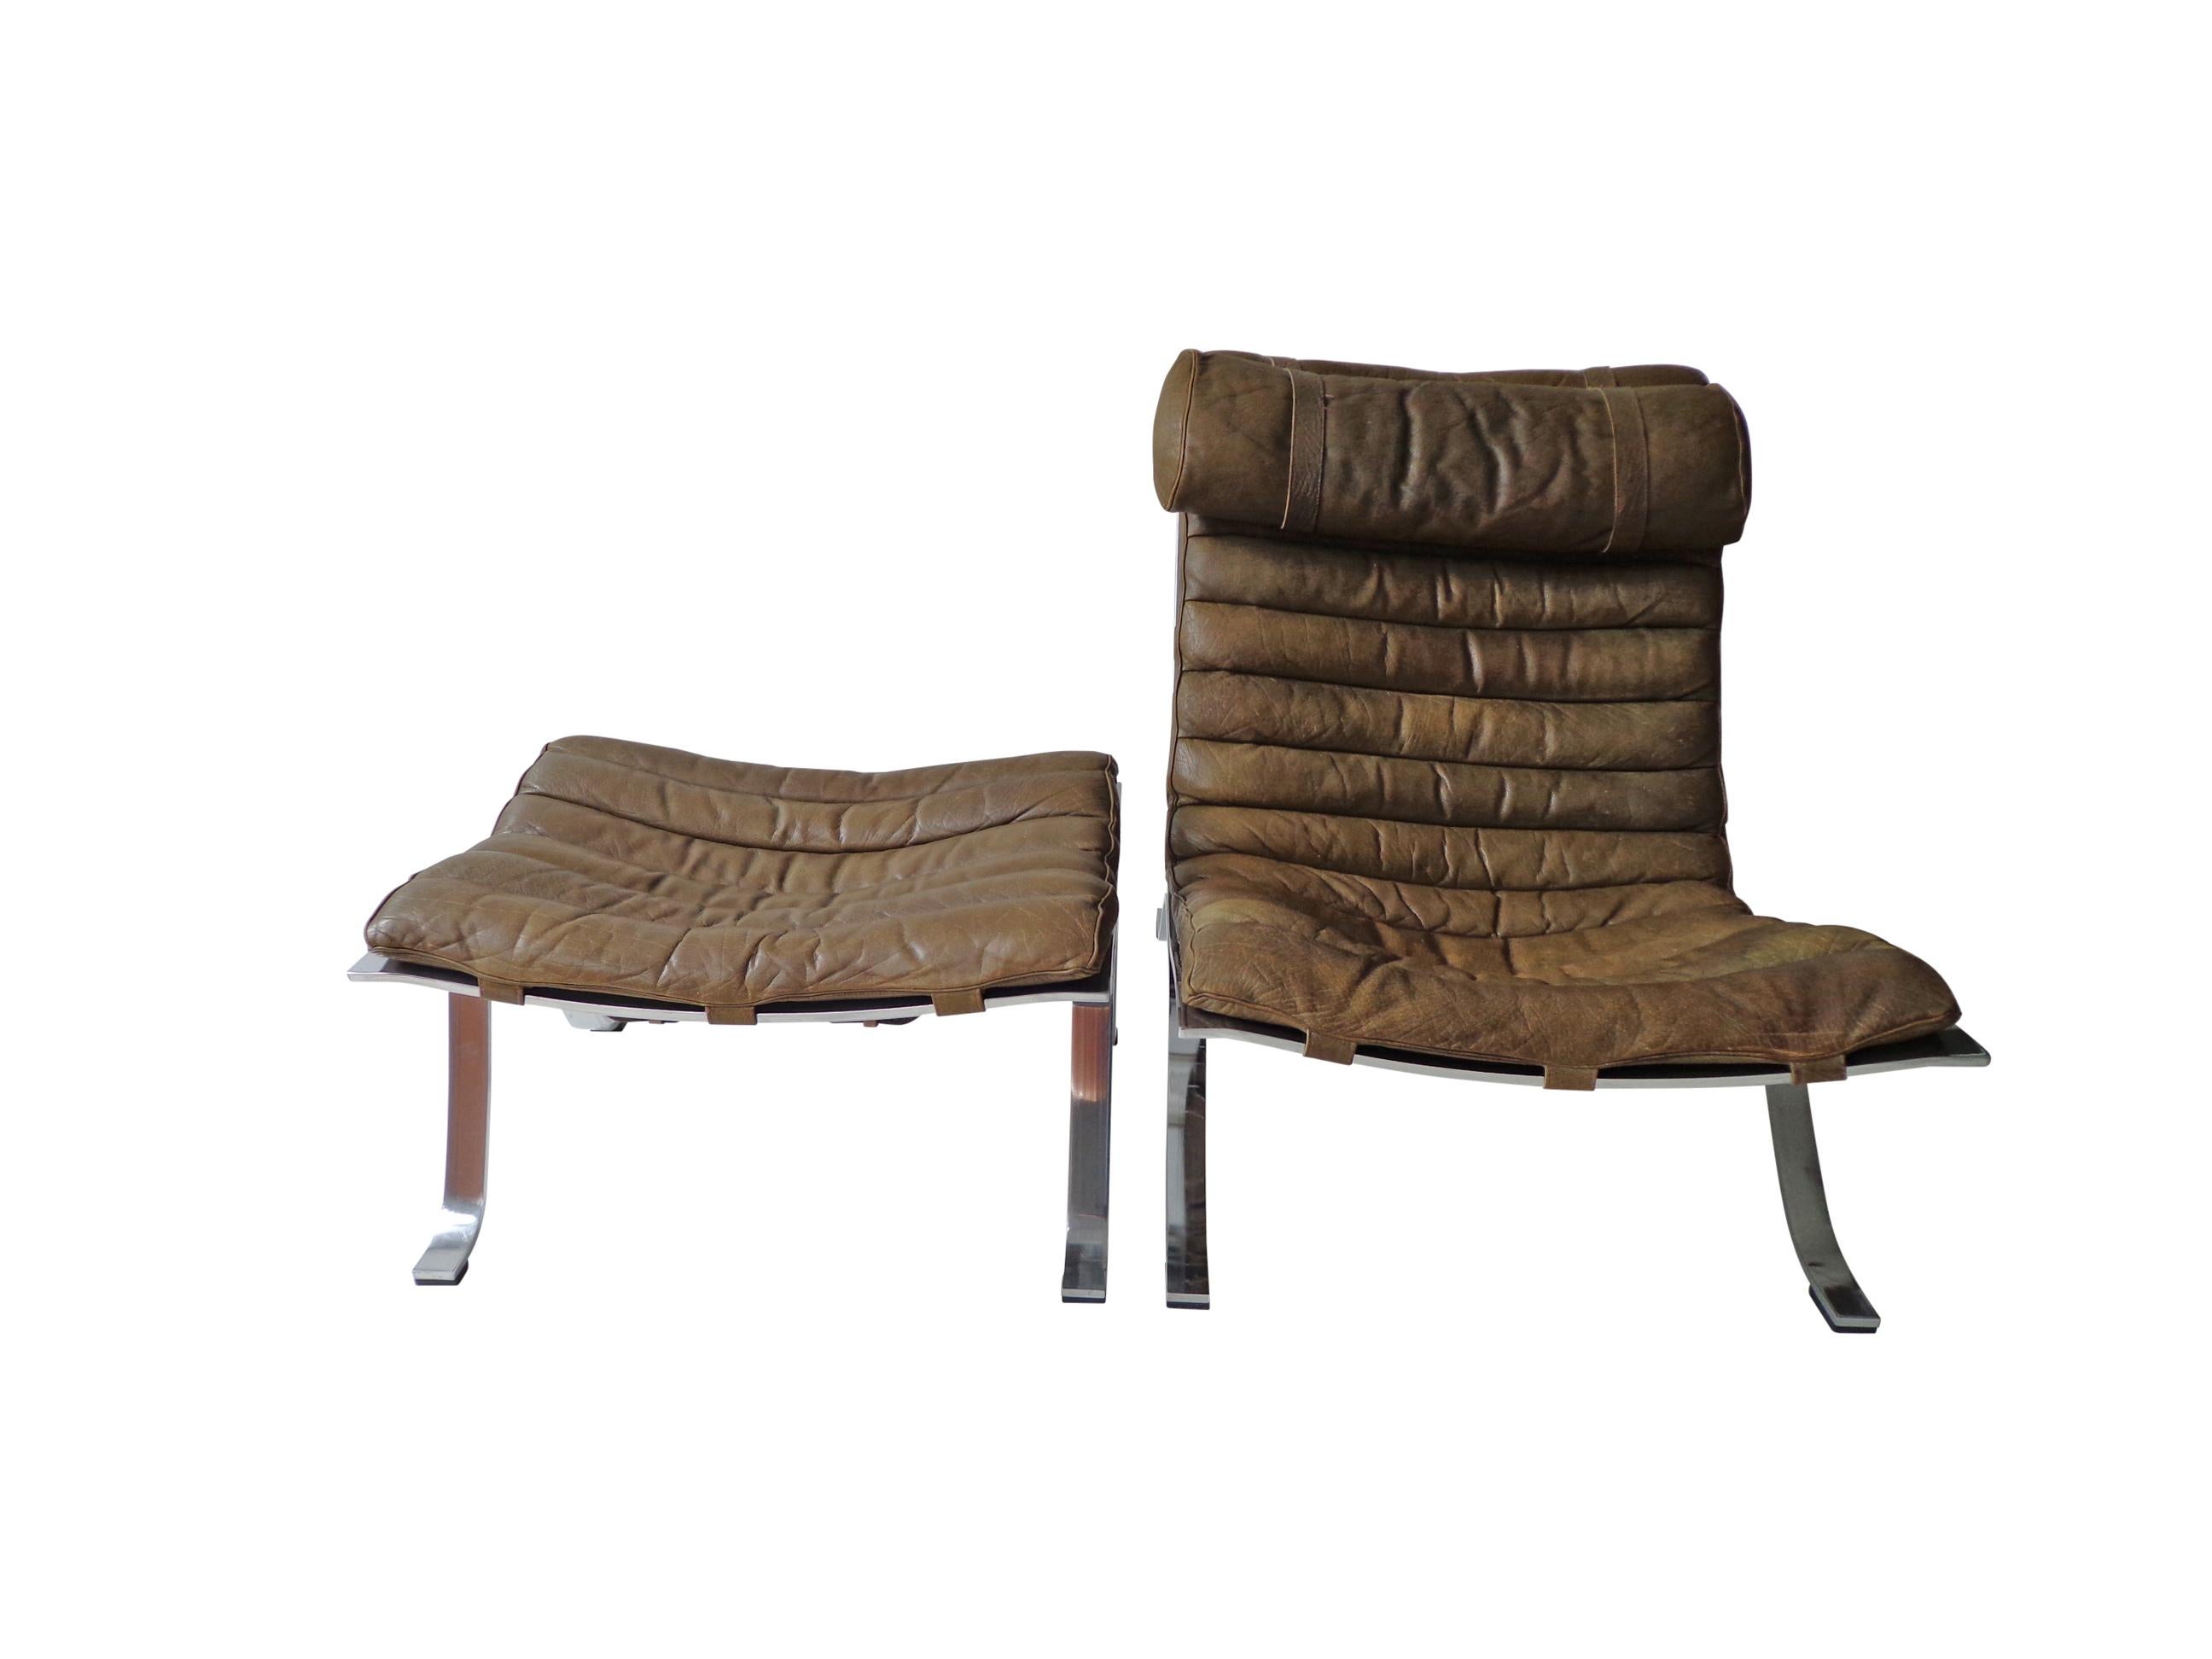 Mid-20th Century Arne Norell ‘Ari’ Lounge Chair and Ottoman in Original Cognac/Brown Leather For Sale